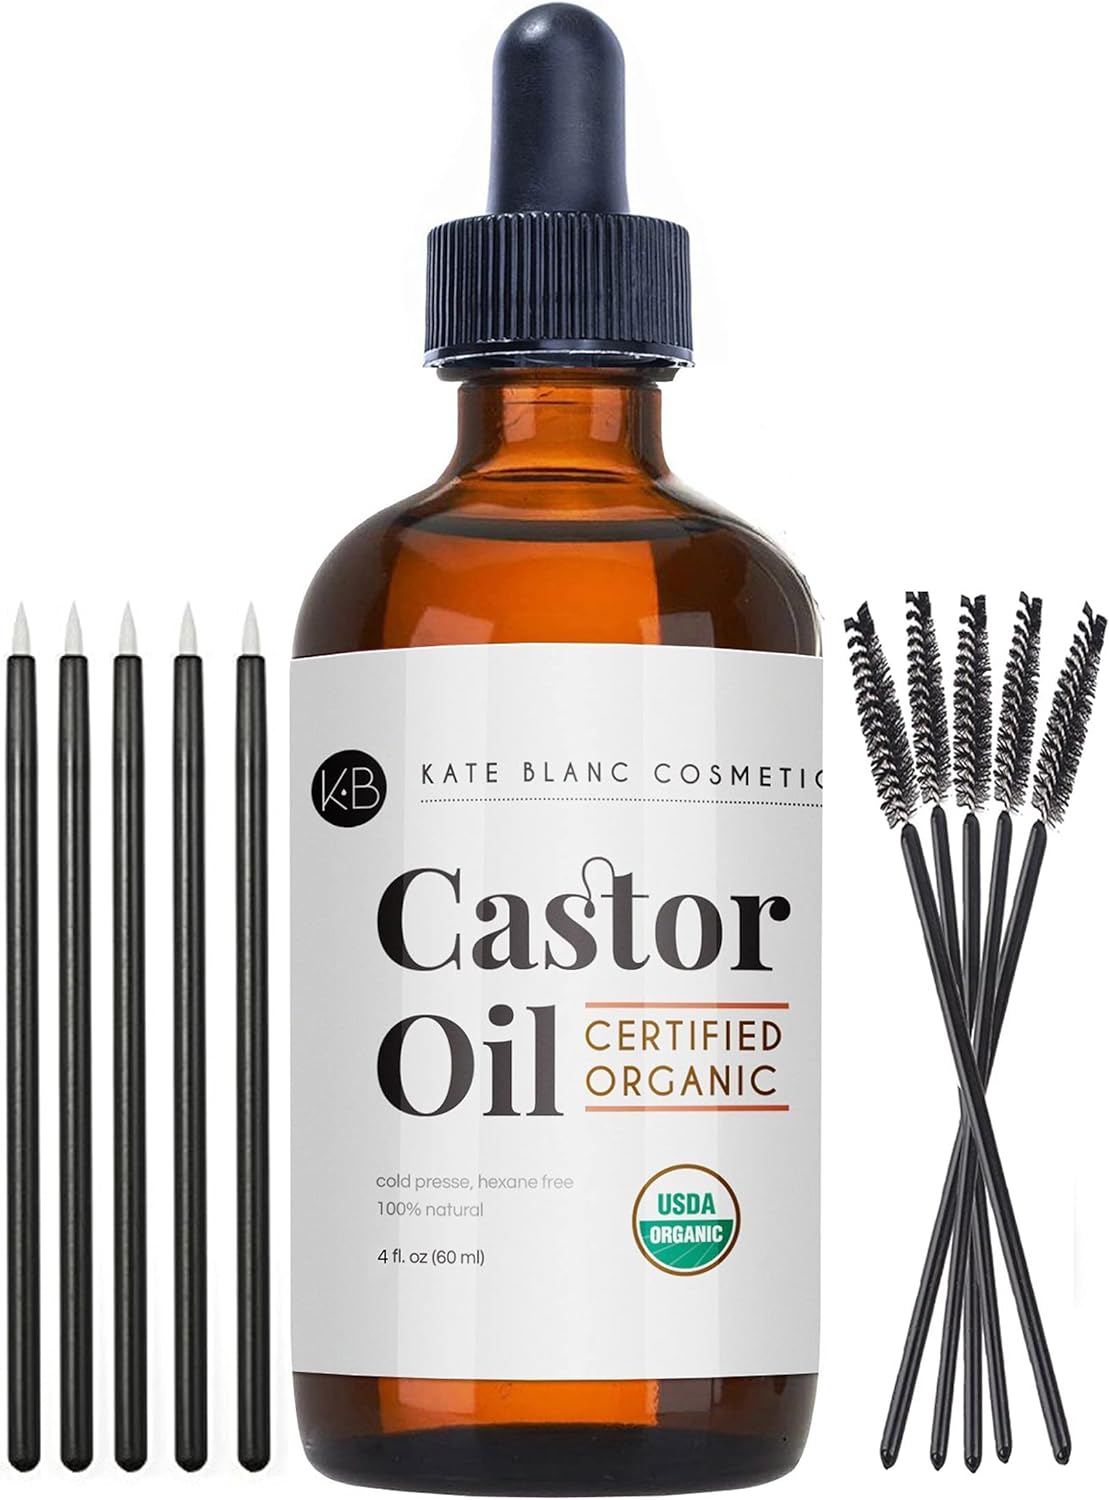 Castor Oil (2oz) USDA Certified Organic, 100% Pure, Cold Pressed, Hexane Free by Kate Blanc. Stimulate Growth for Eyelashes, Eyebrows, Hair. Lash Growth Serum. Brow Treatment. FREE Mascara Starter Kit